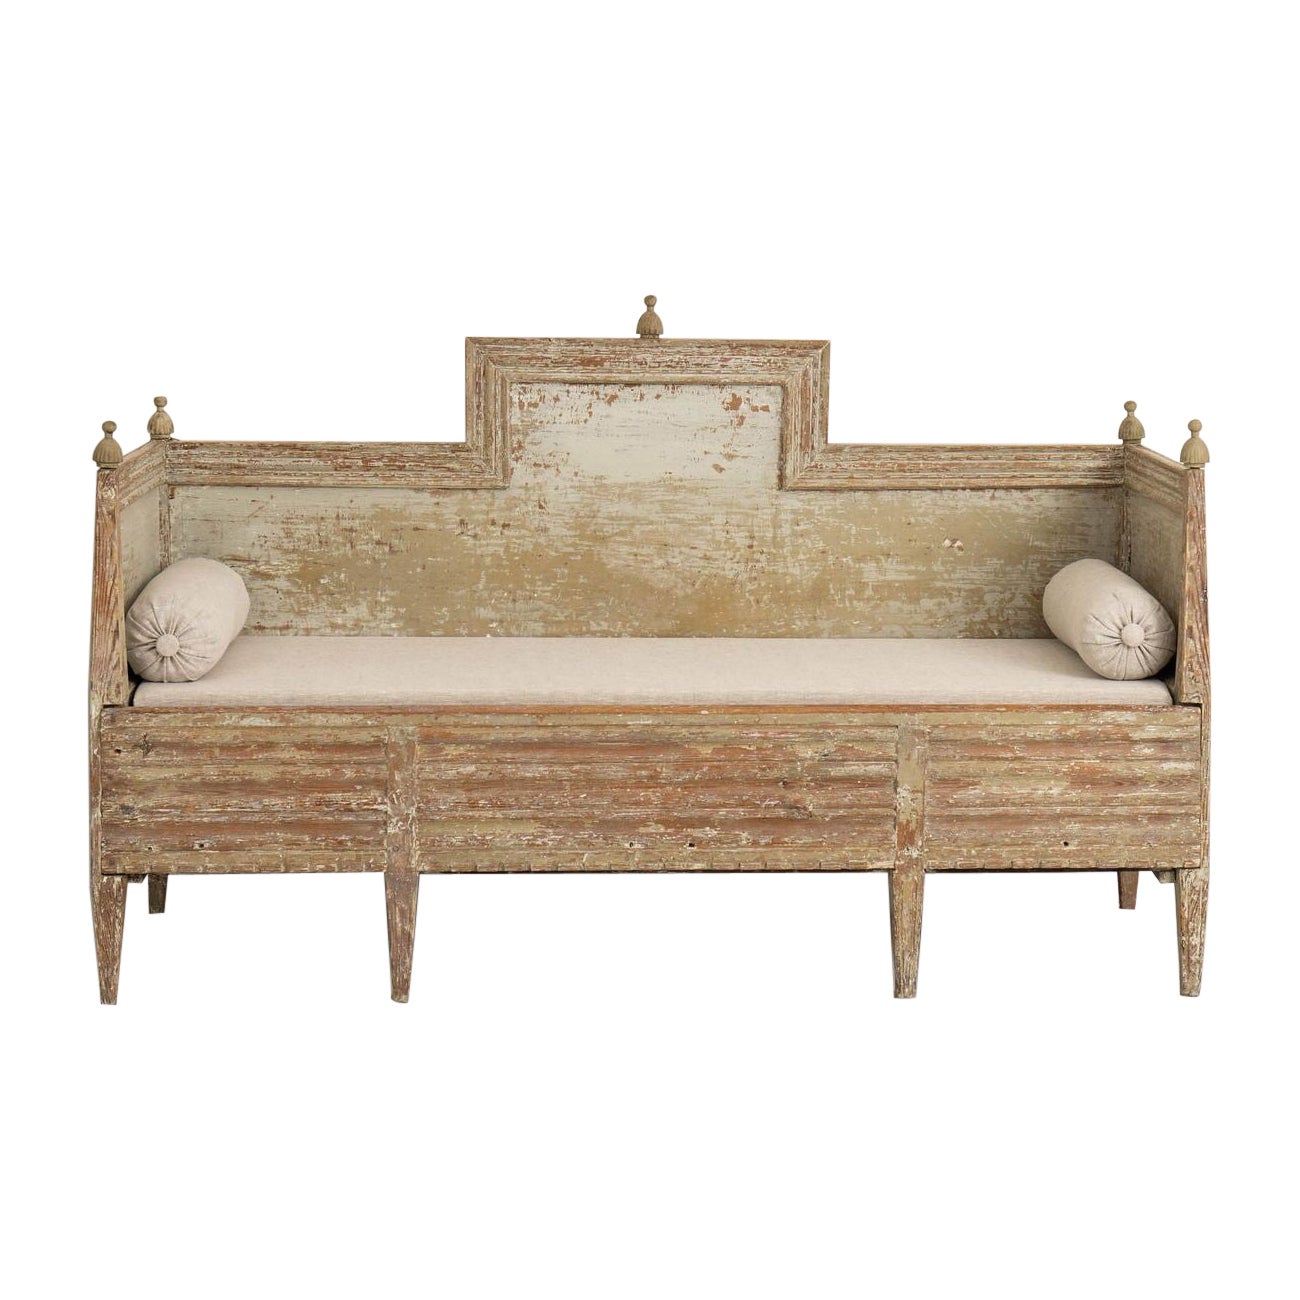 19th c. Swedish Late Gustavian Sofa Bench in Original Paint For Sale